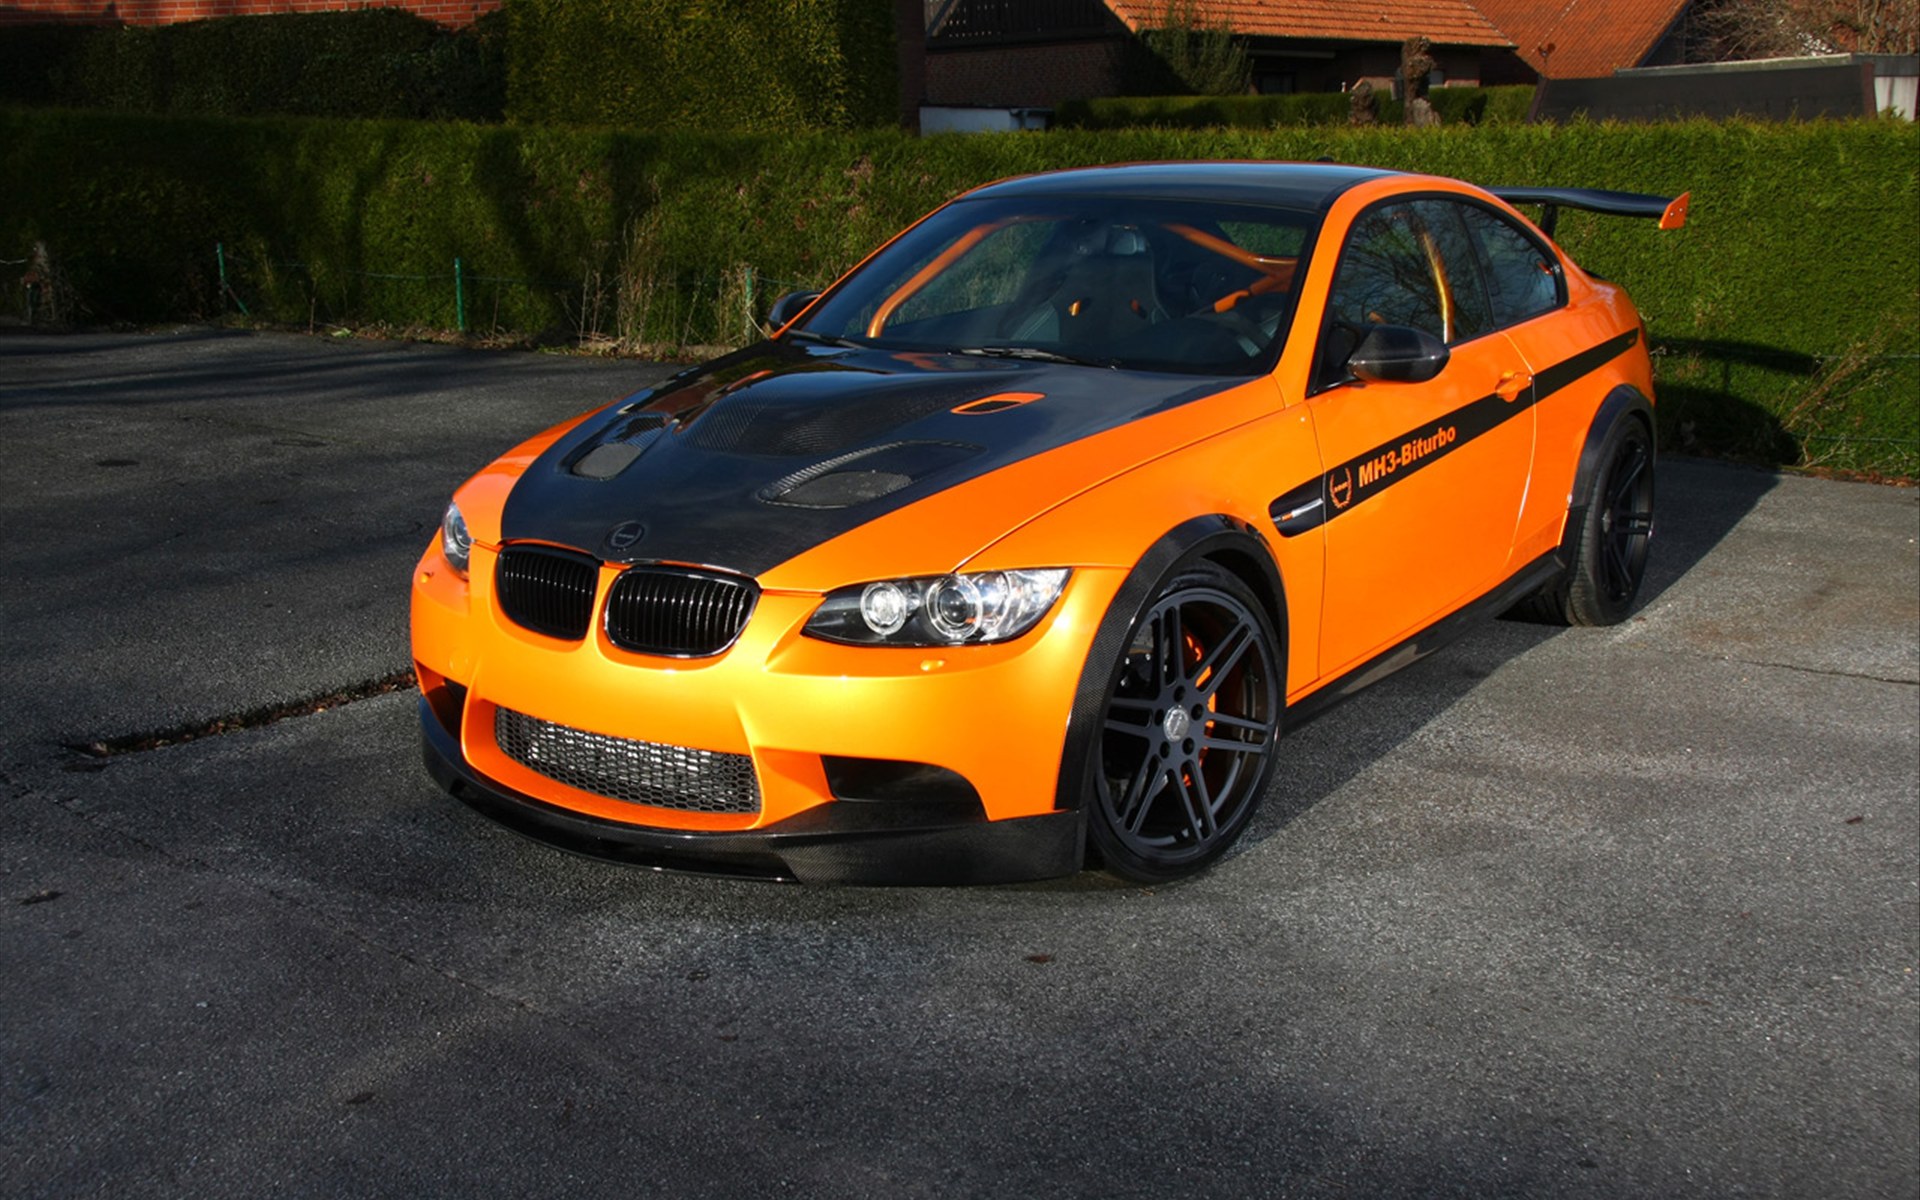 2012 Tuning Concepts - BMW M3 e92 - Dark-Cars Wallpapers